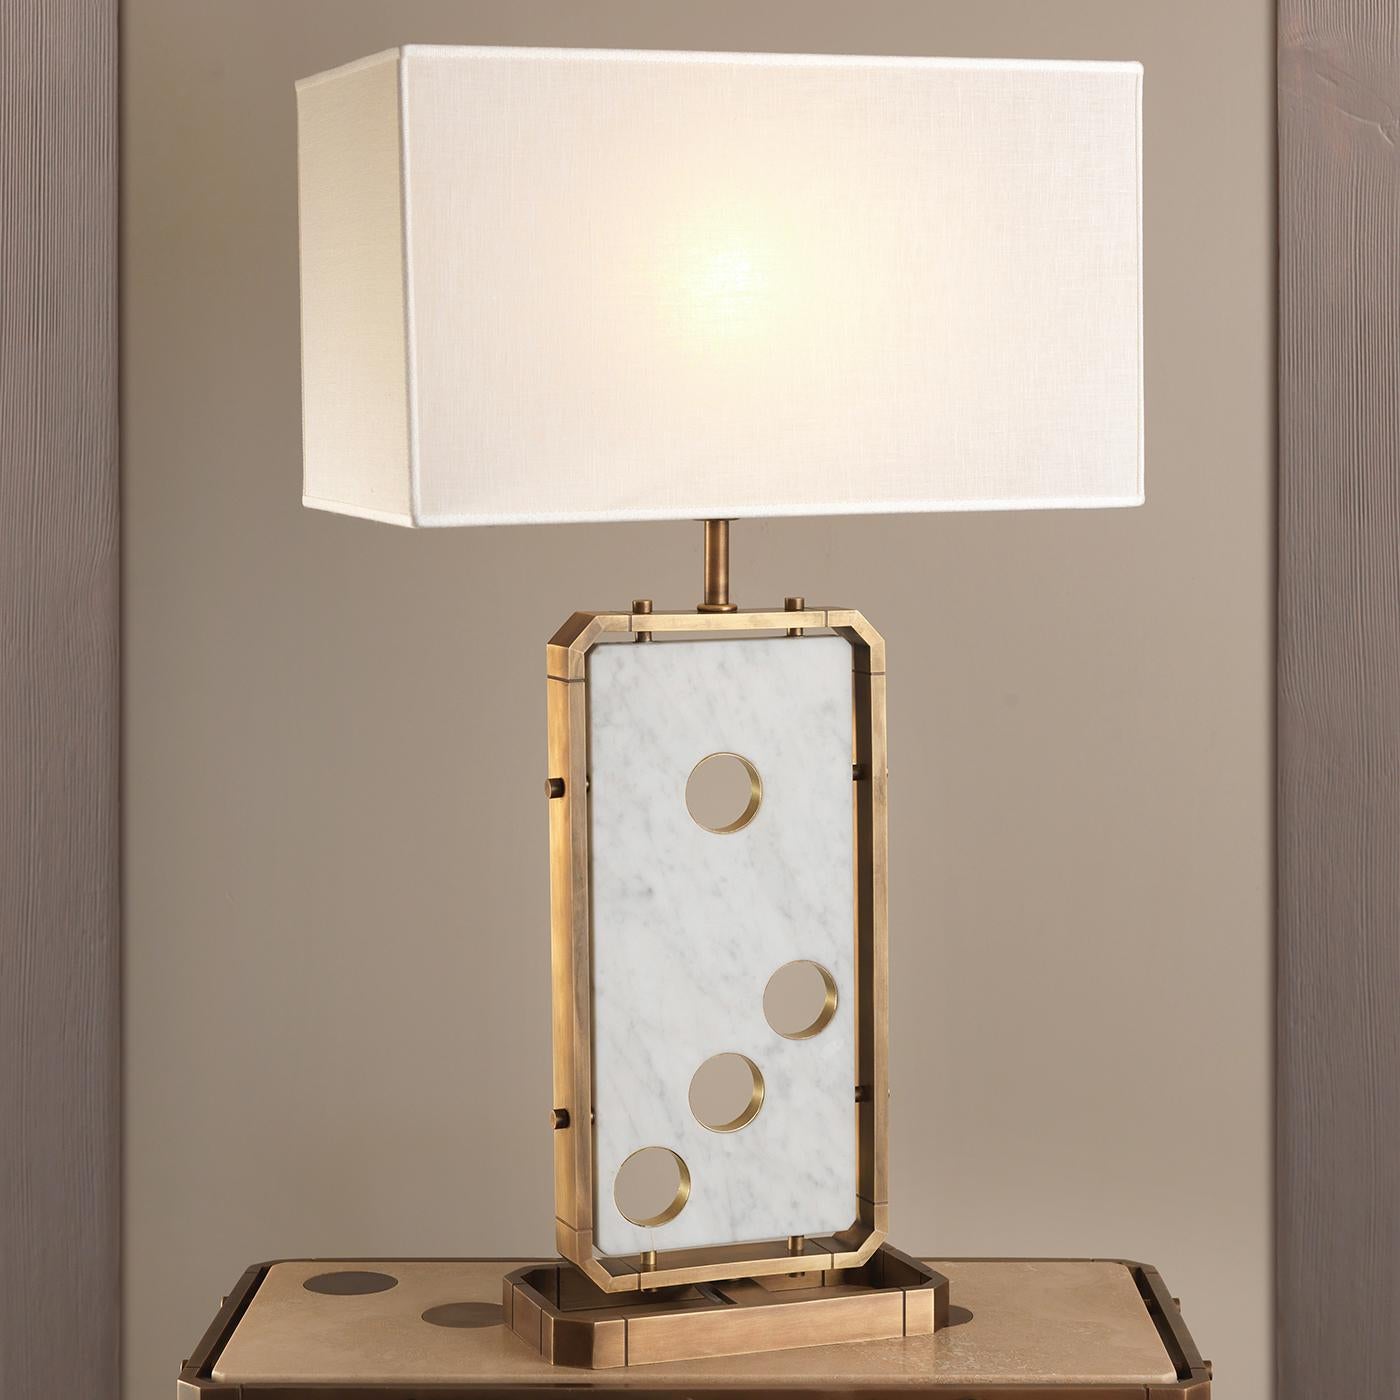 This splendid table lamp designed by Ciarmoli Queda studio is part of the Domino collection. This playful piece can be displayed as a statement in a modern interior, or combined with the console of the same series for a complete look. The standout